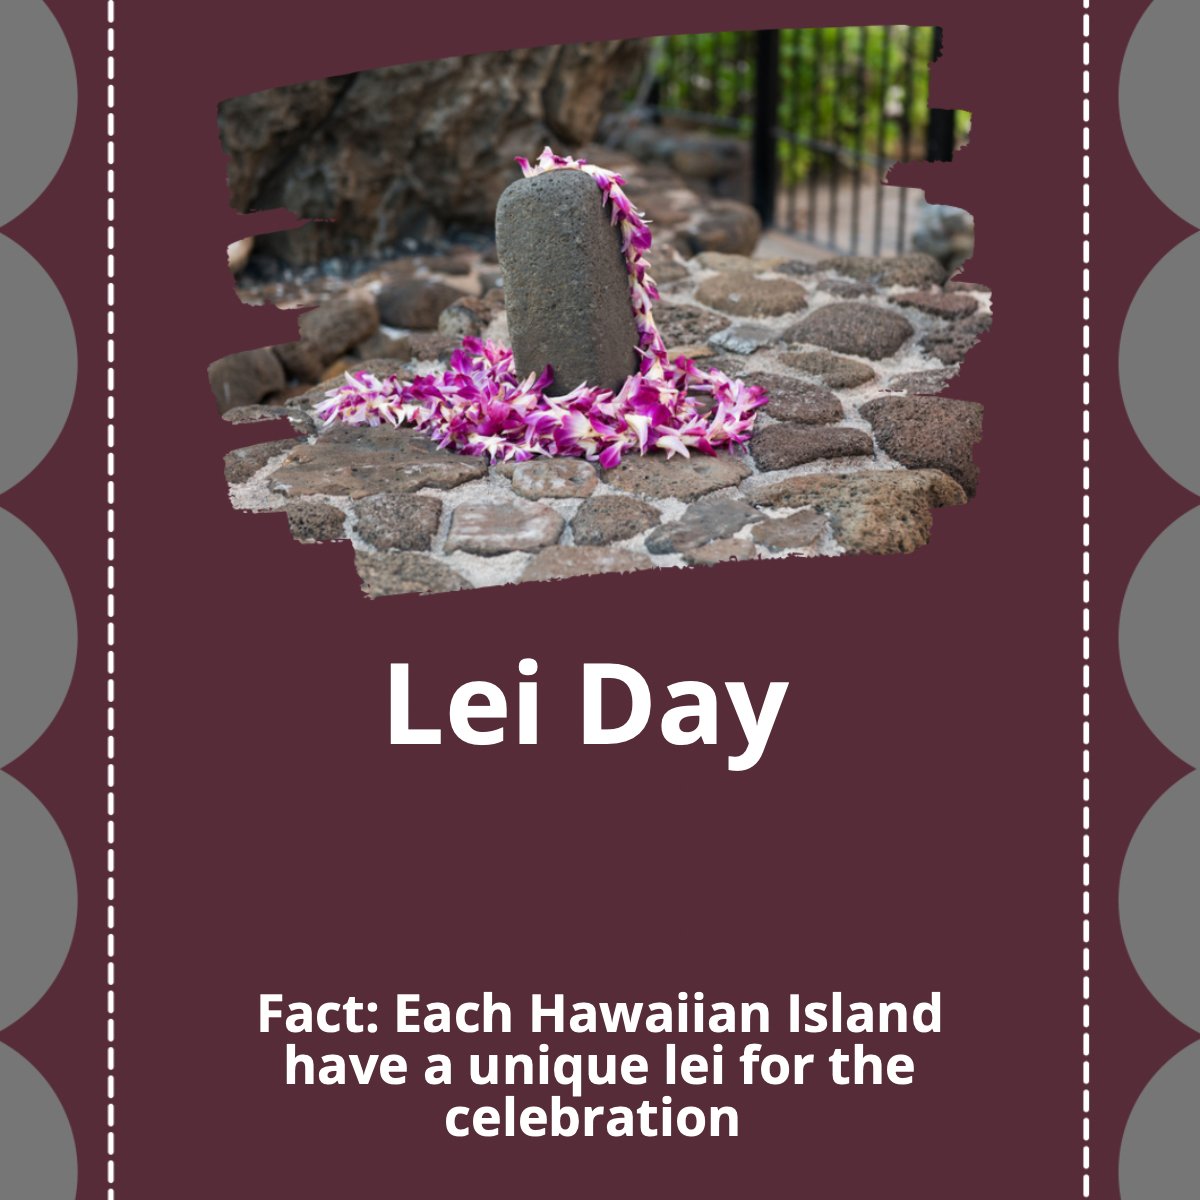 Happy Lei Day to all who celebrate 🙌!

Did you know? 🤔  Each Hawaiian island has a unique lei for the celebration. 😱

#lei #day #hawaii #flowers #celebration #grey
 #swflrealtor #swflrealestate #floridarealestate #florida #newconstruction #homebuying